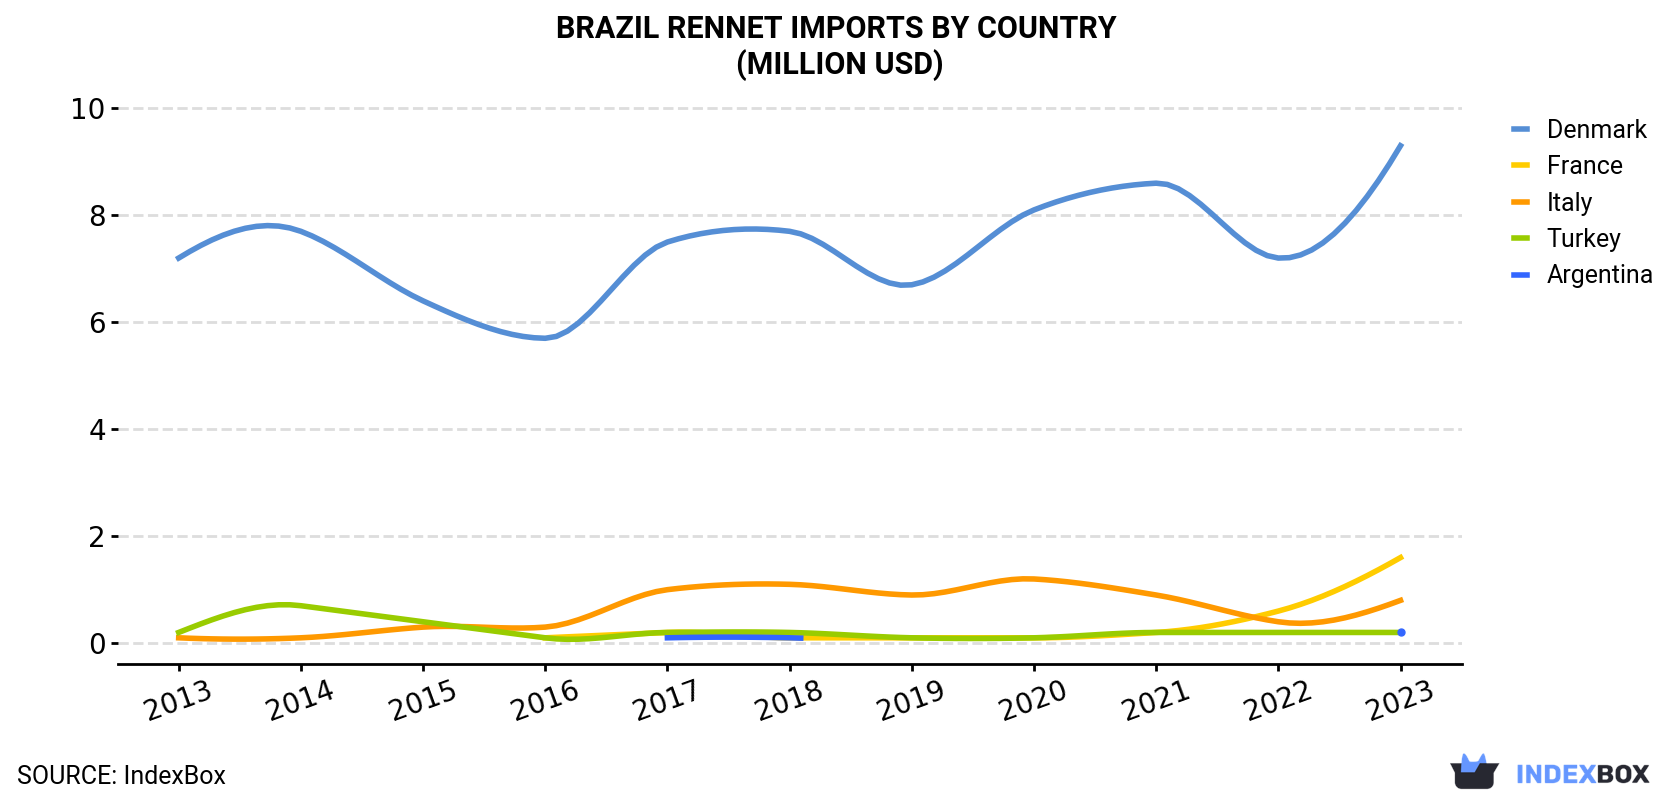 Brazil Rennet Imports By Country (Million USD)